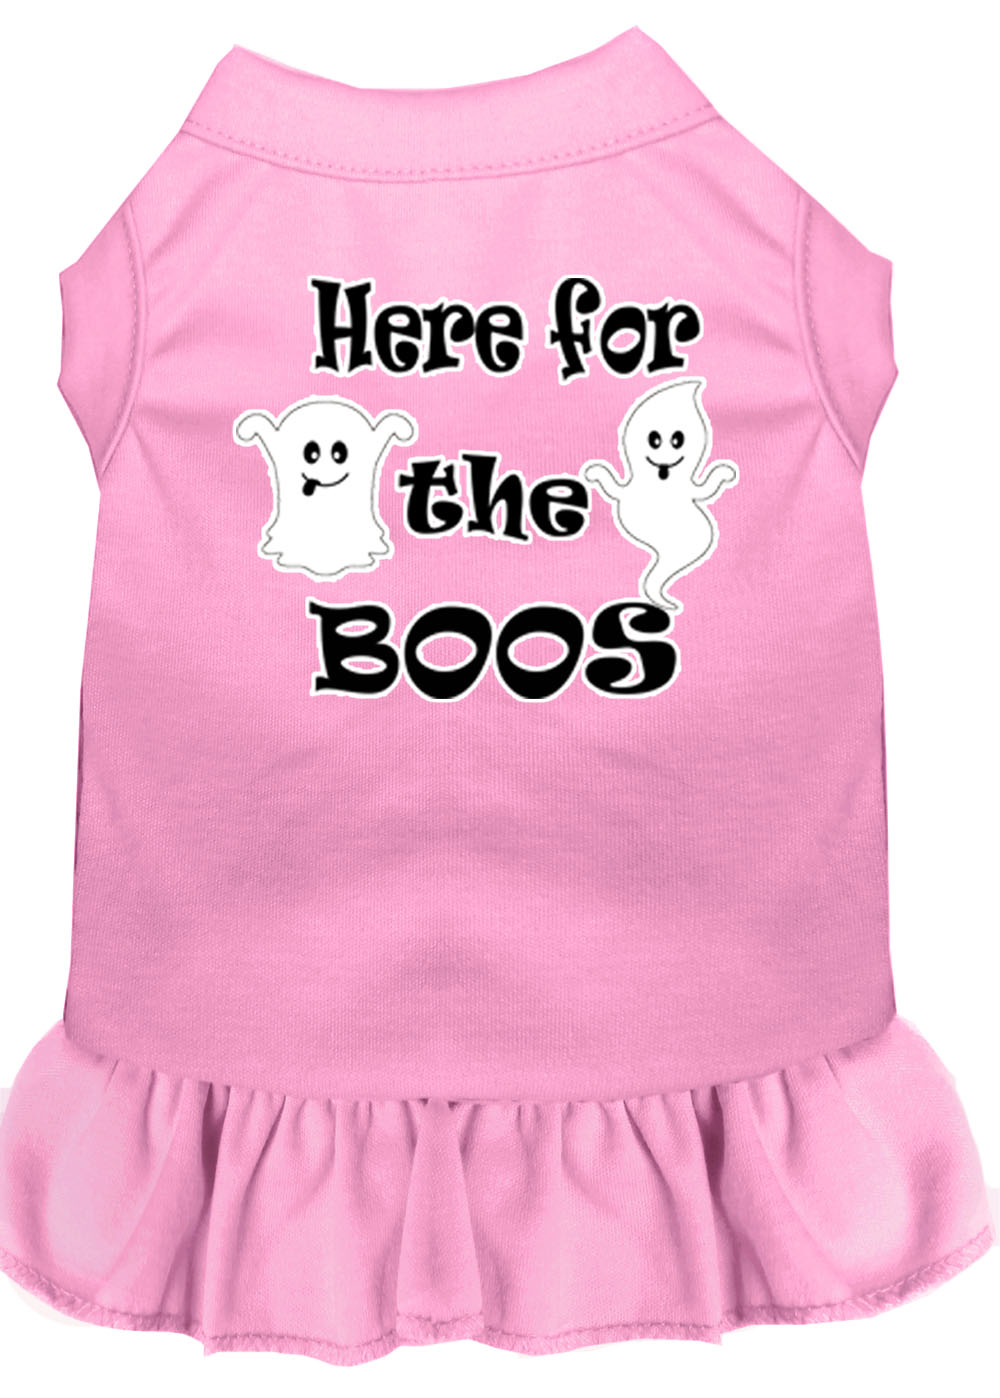 Here for the Boos Screen Print Dog Dress Light Pink Lg